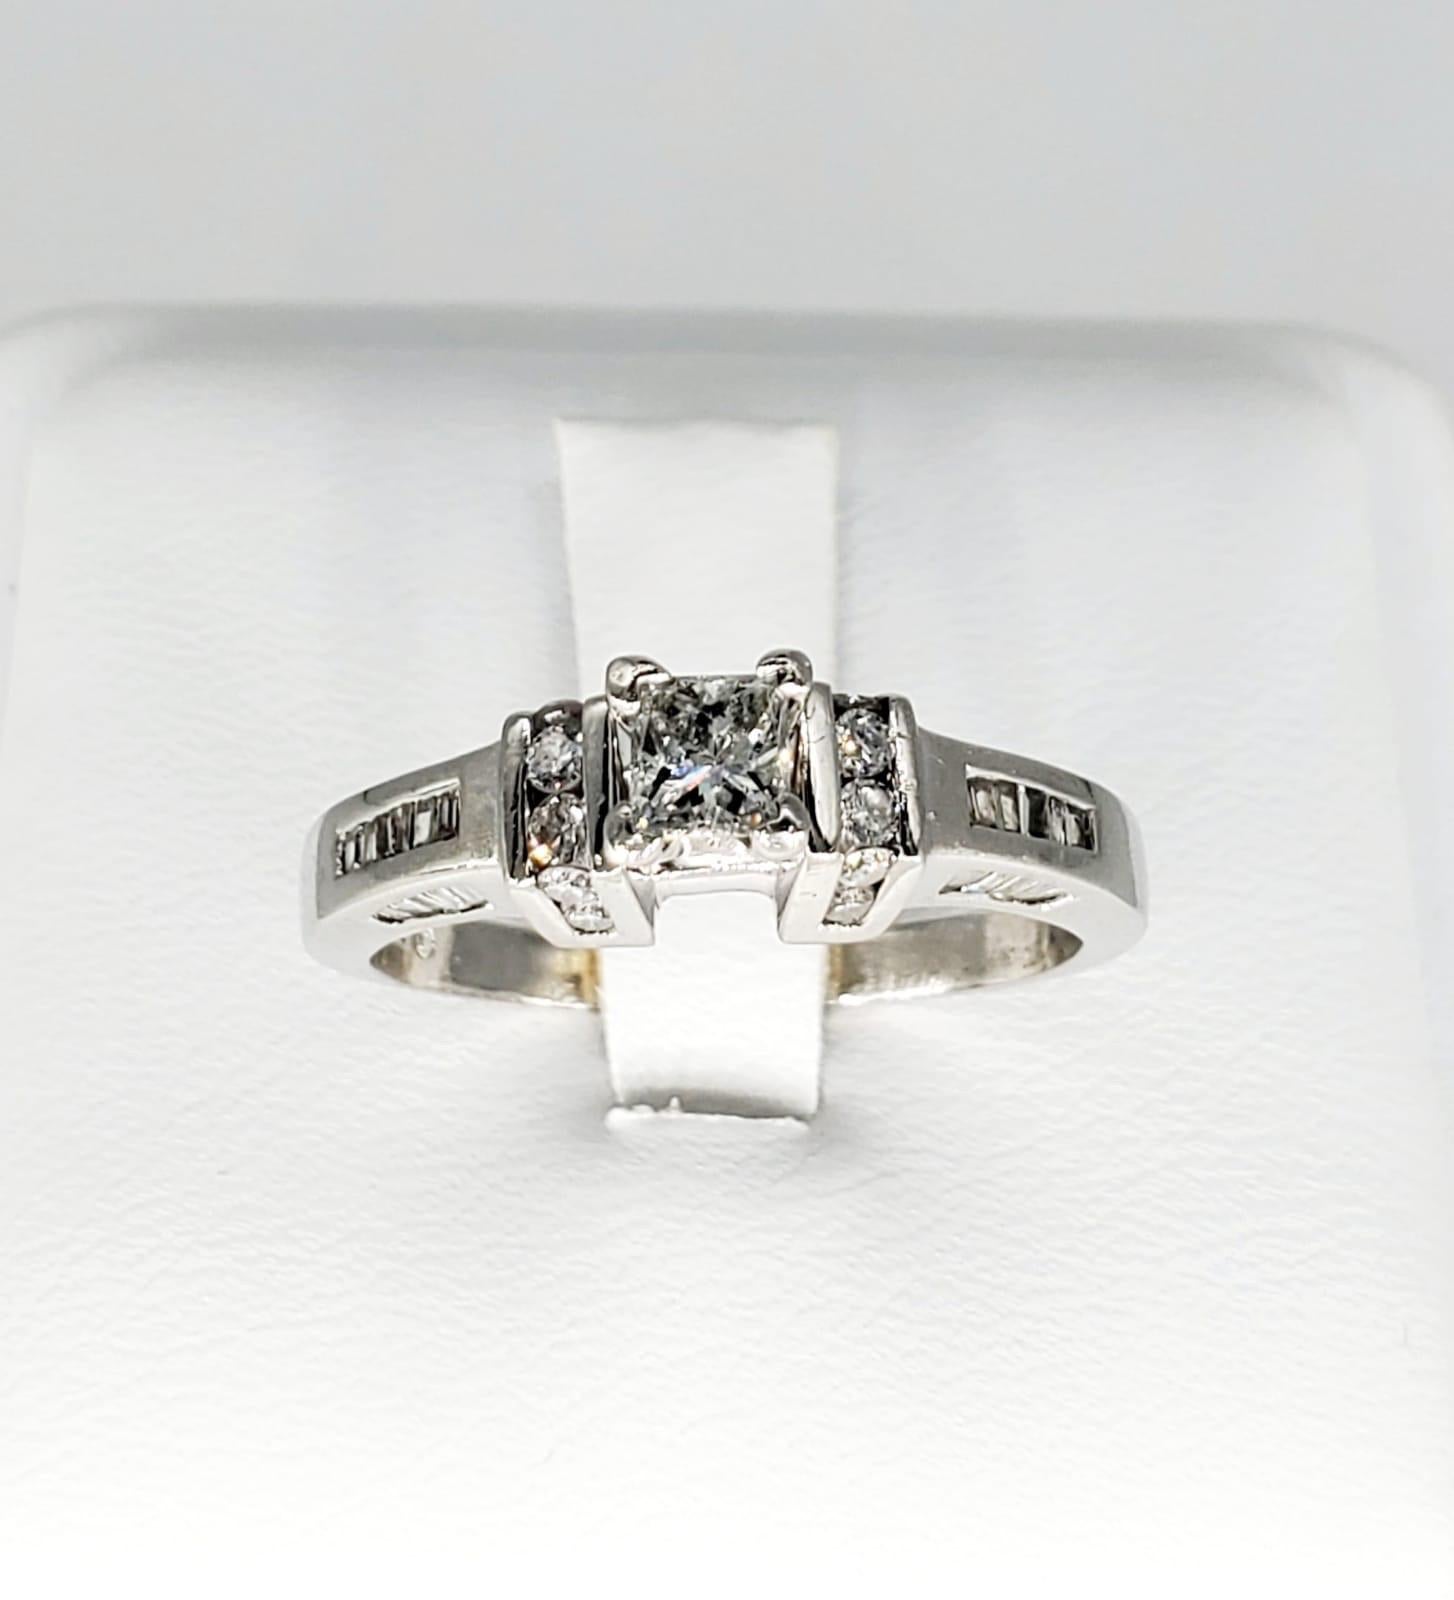 ZEI Antique 1.50 Carats Diamond Engagement Ring Platinum 900. The ring has a lot of details including most of it by channel setting the diamonds. The center diamond weights 0.50 carat and is a princess cut. The round diamonds around total weight